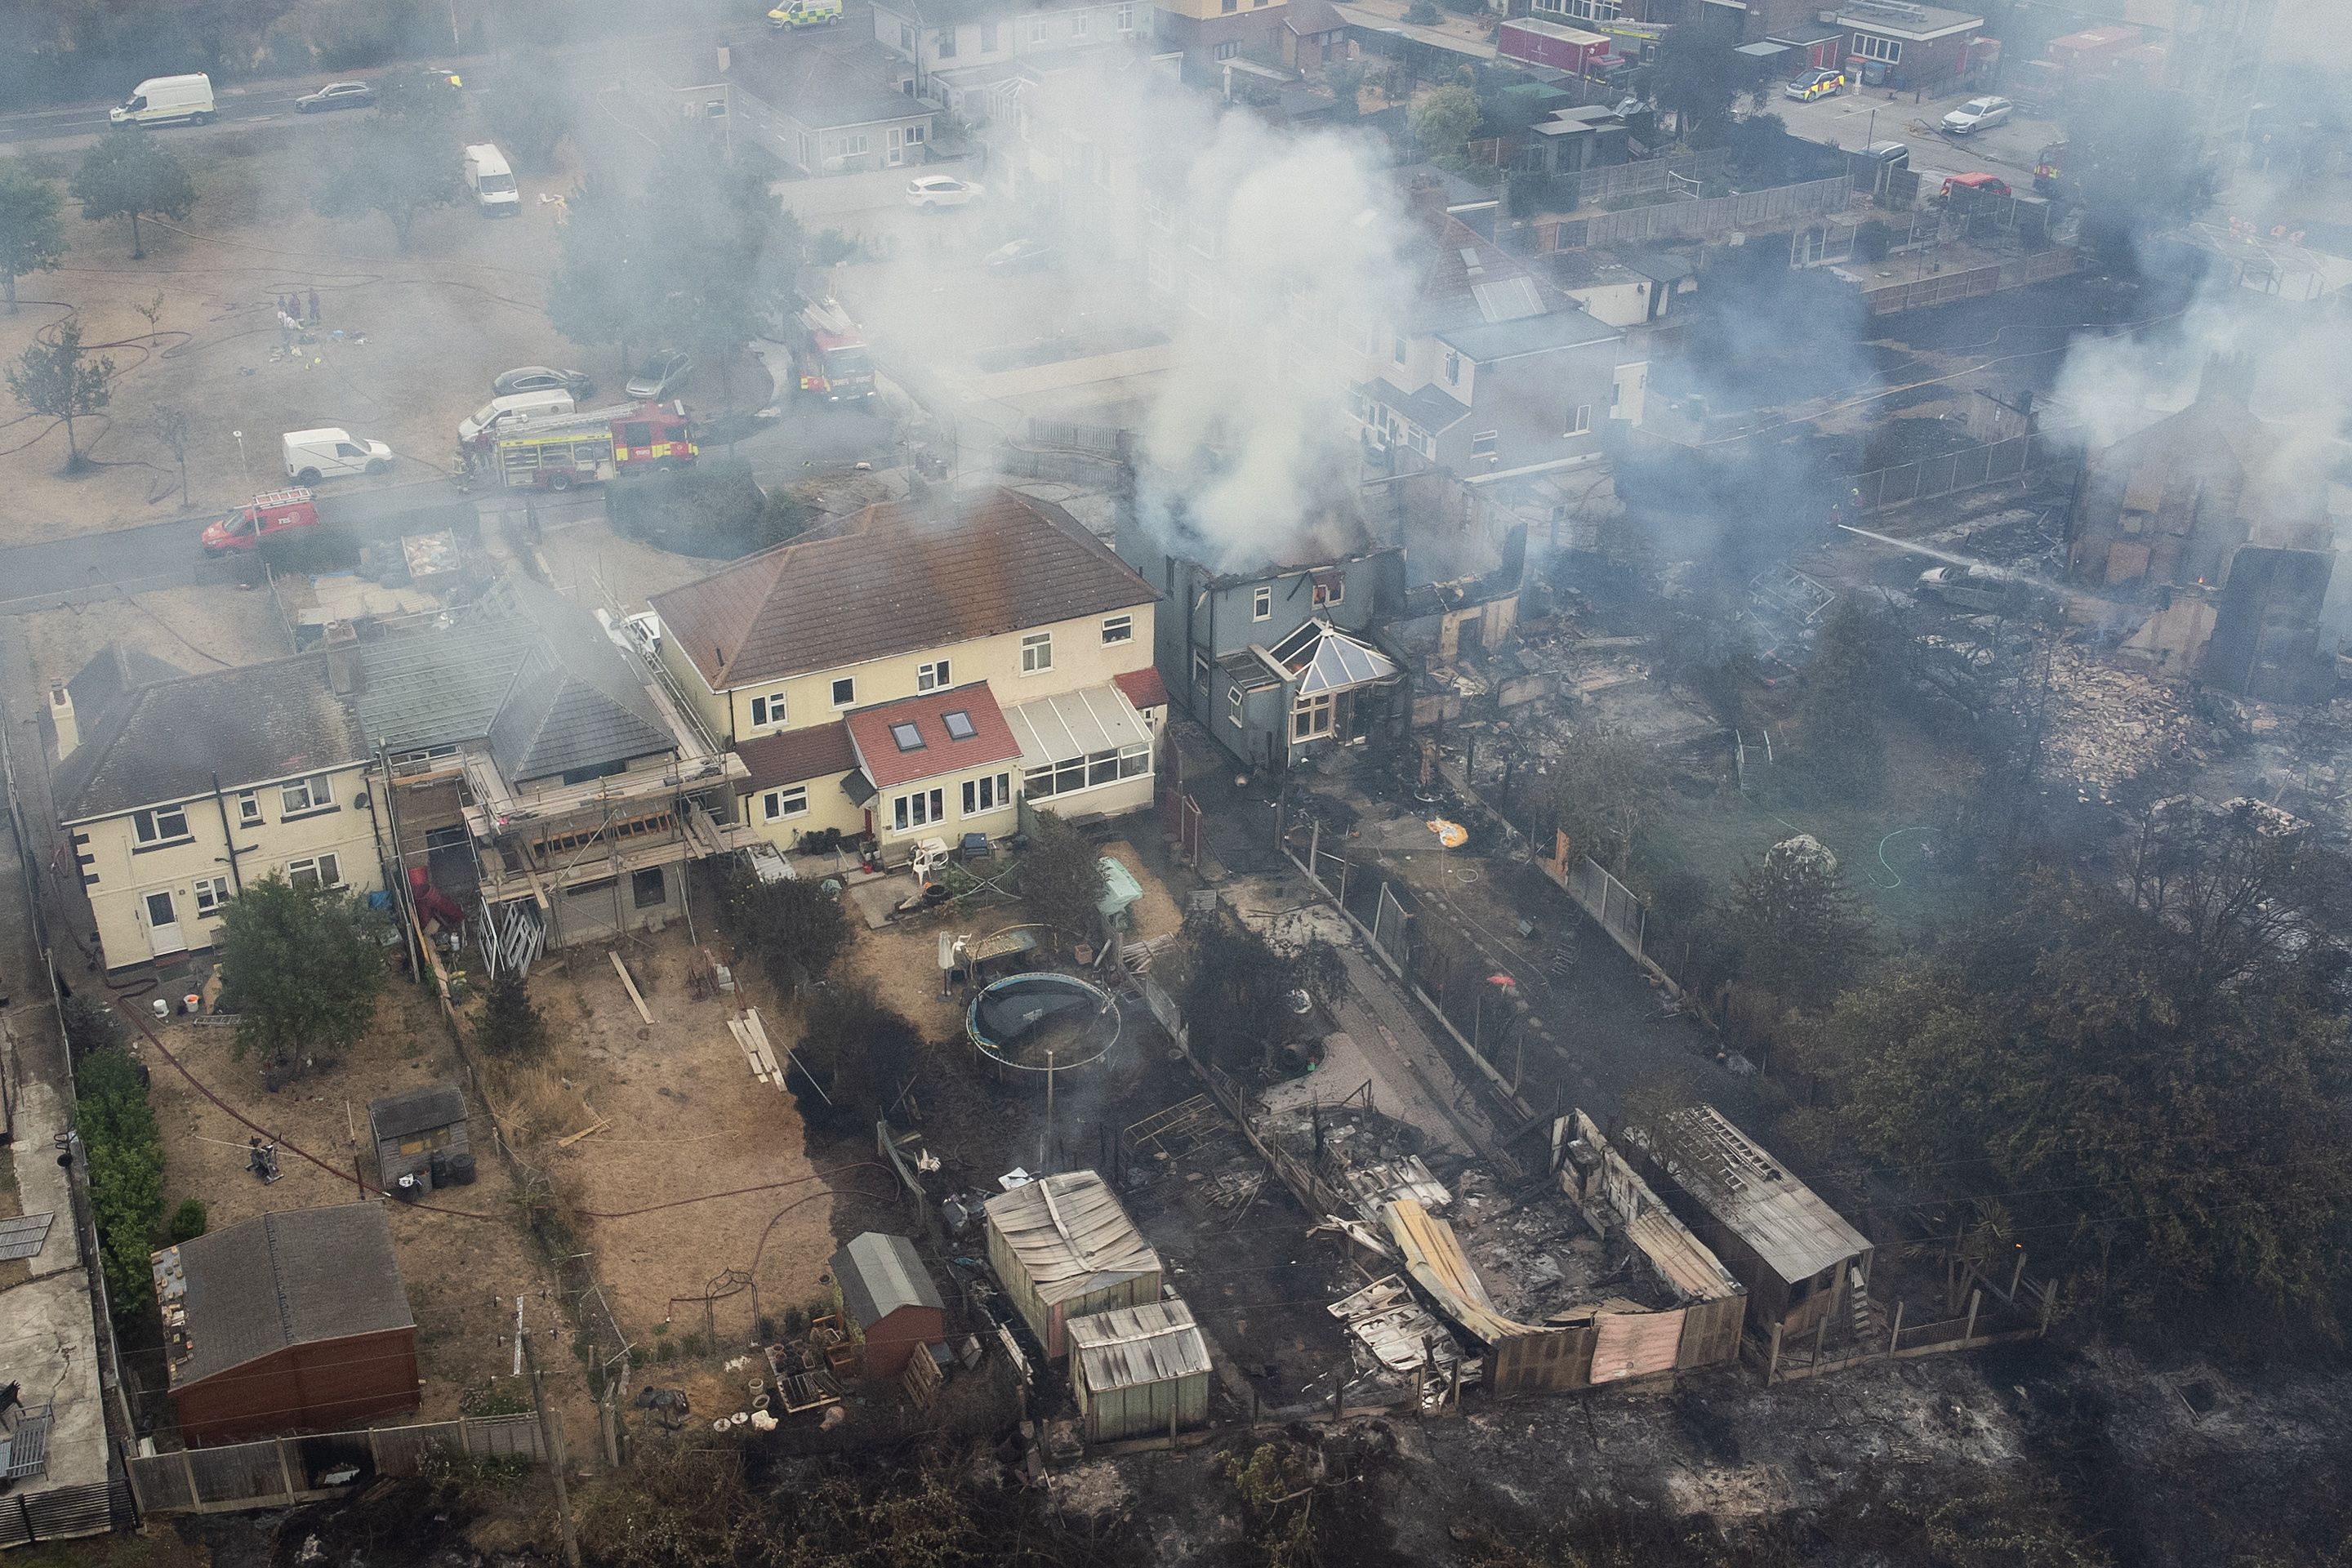 Burned buildings and smoke from a fire in a residential area in Wennington, England, on July 19.